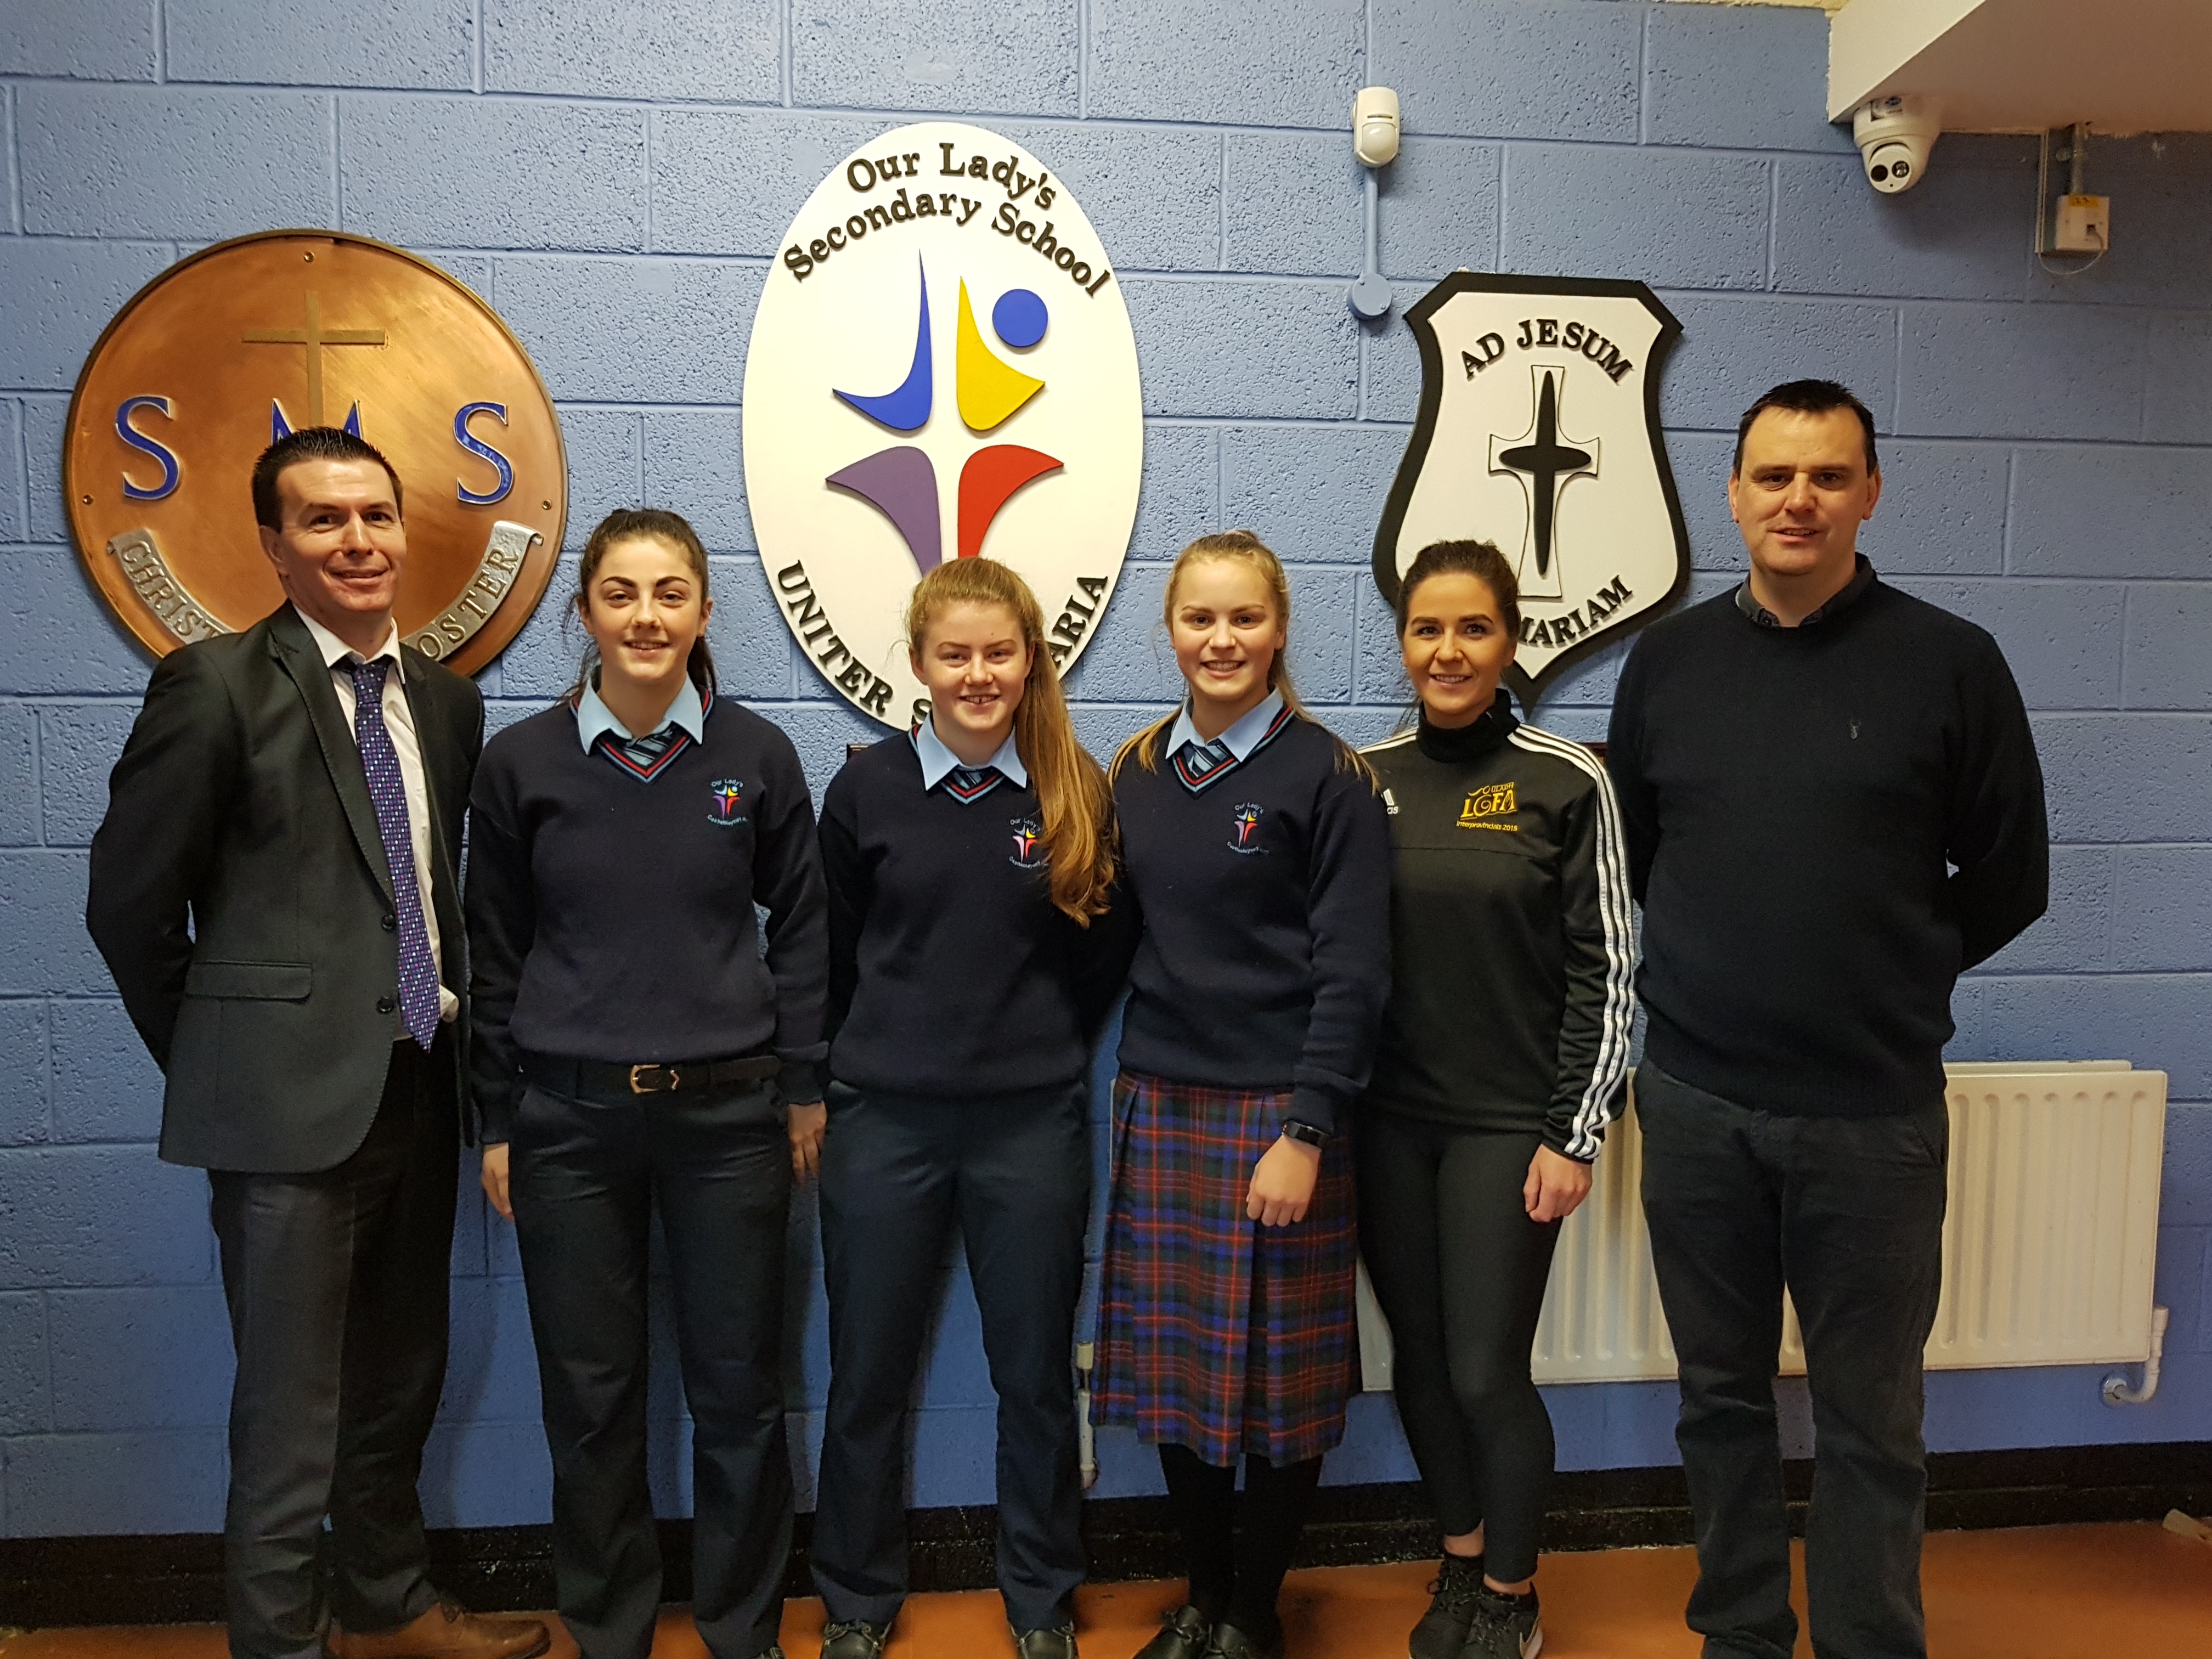 Three more All Star Awards for Our Lady’s Secondary School, Castleblayney